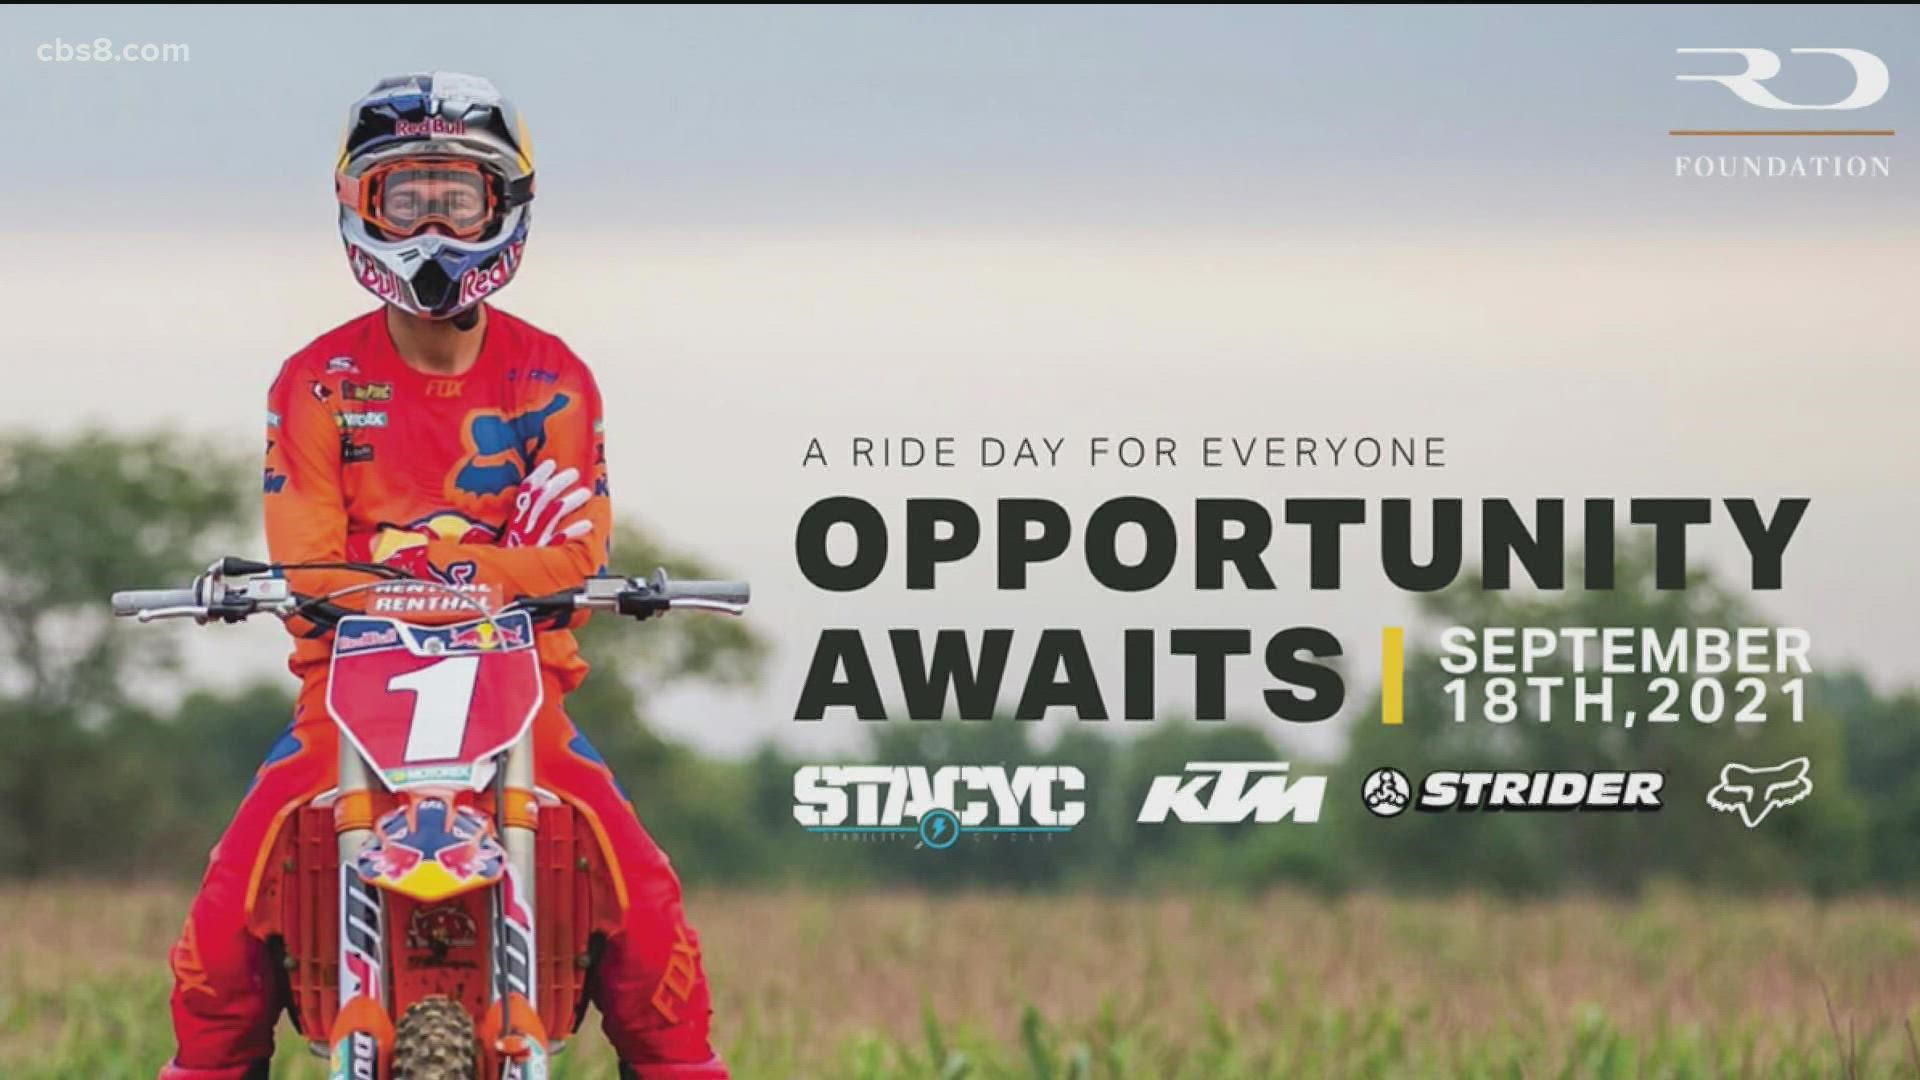 Nine-time supercross & pro motocross champion, Ryan Dungey joined Morning Extra to talk about the event and how to get involved!